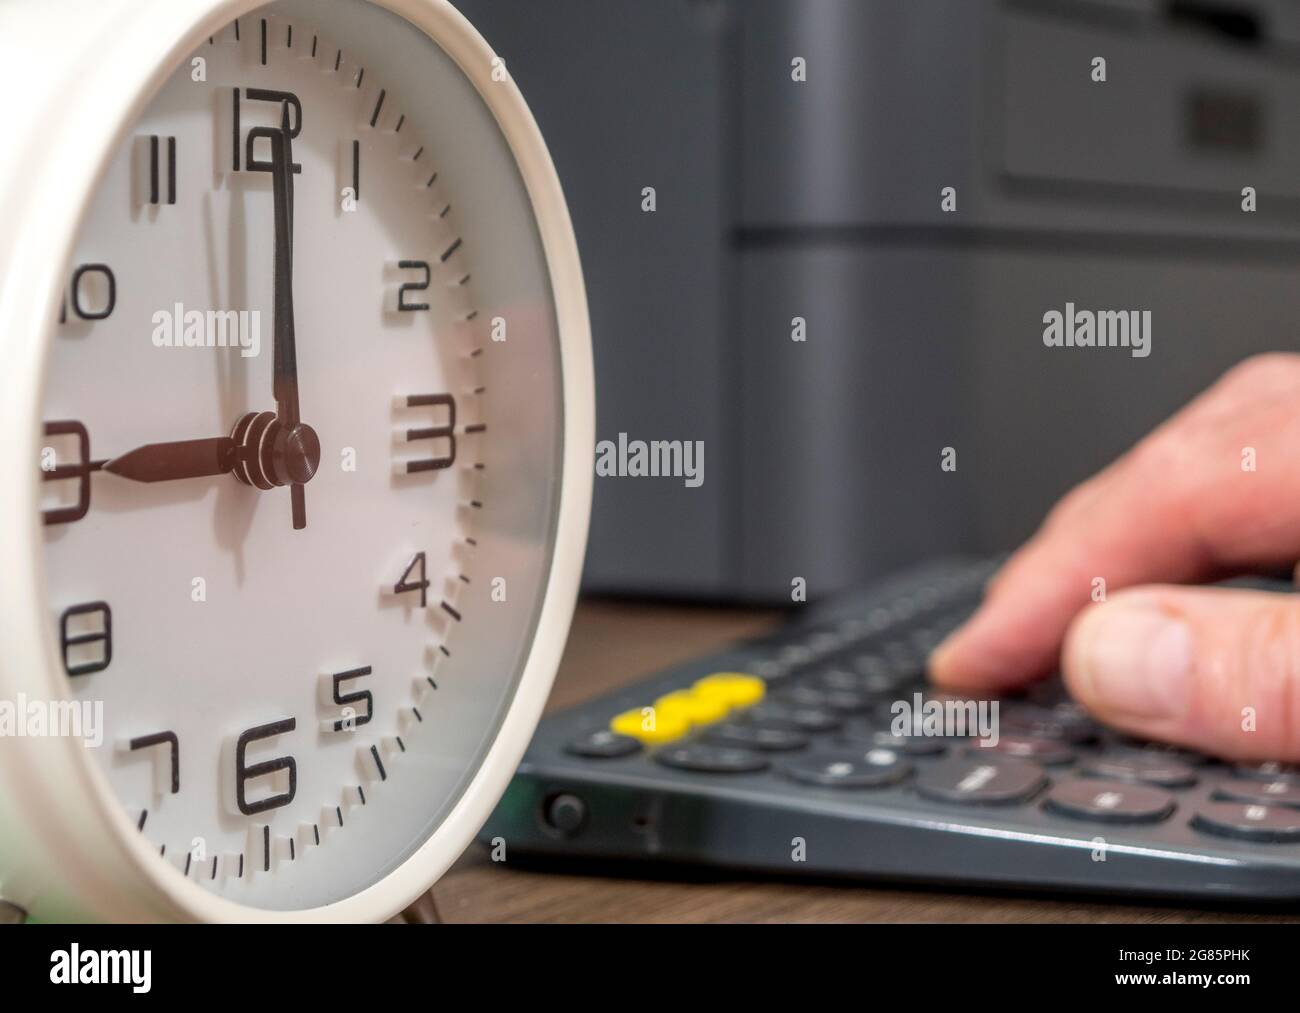 Closeup of defocused man’s fingers using a computer keyboard on a desk, with focus on a clock face showing 9 o’clock. Concept of starting office work. Stock Photo